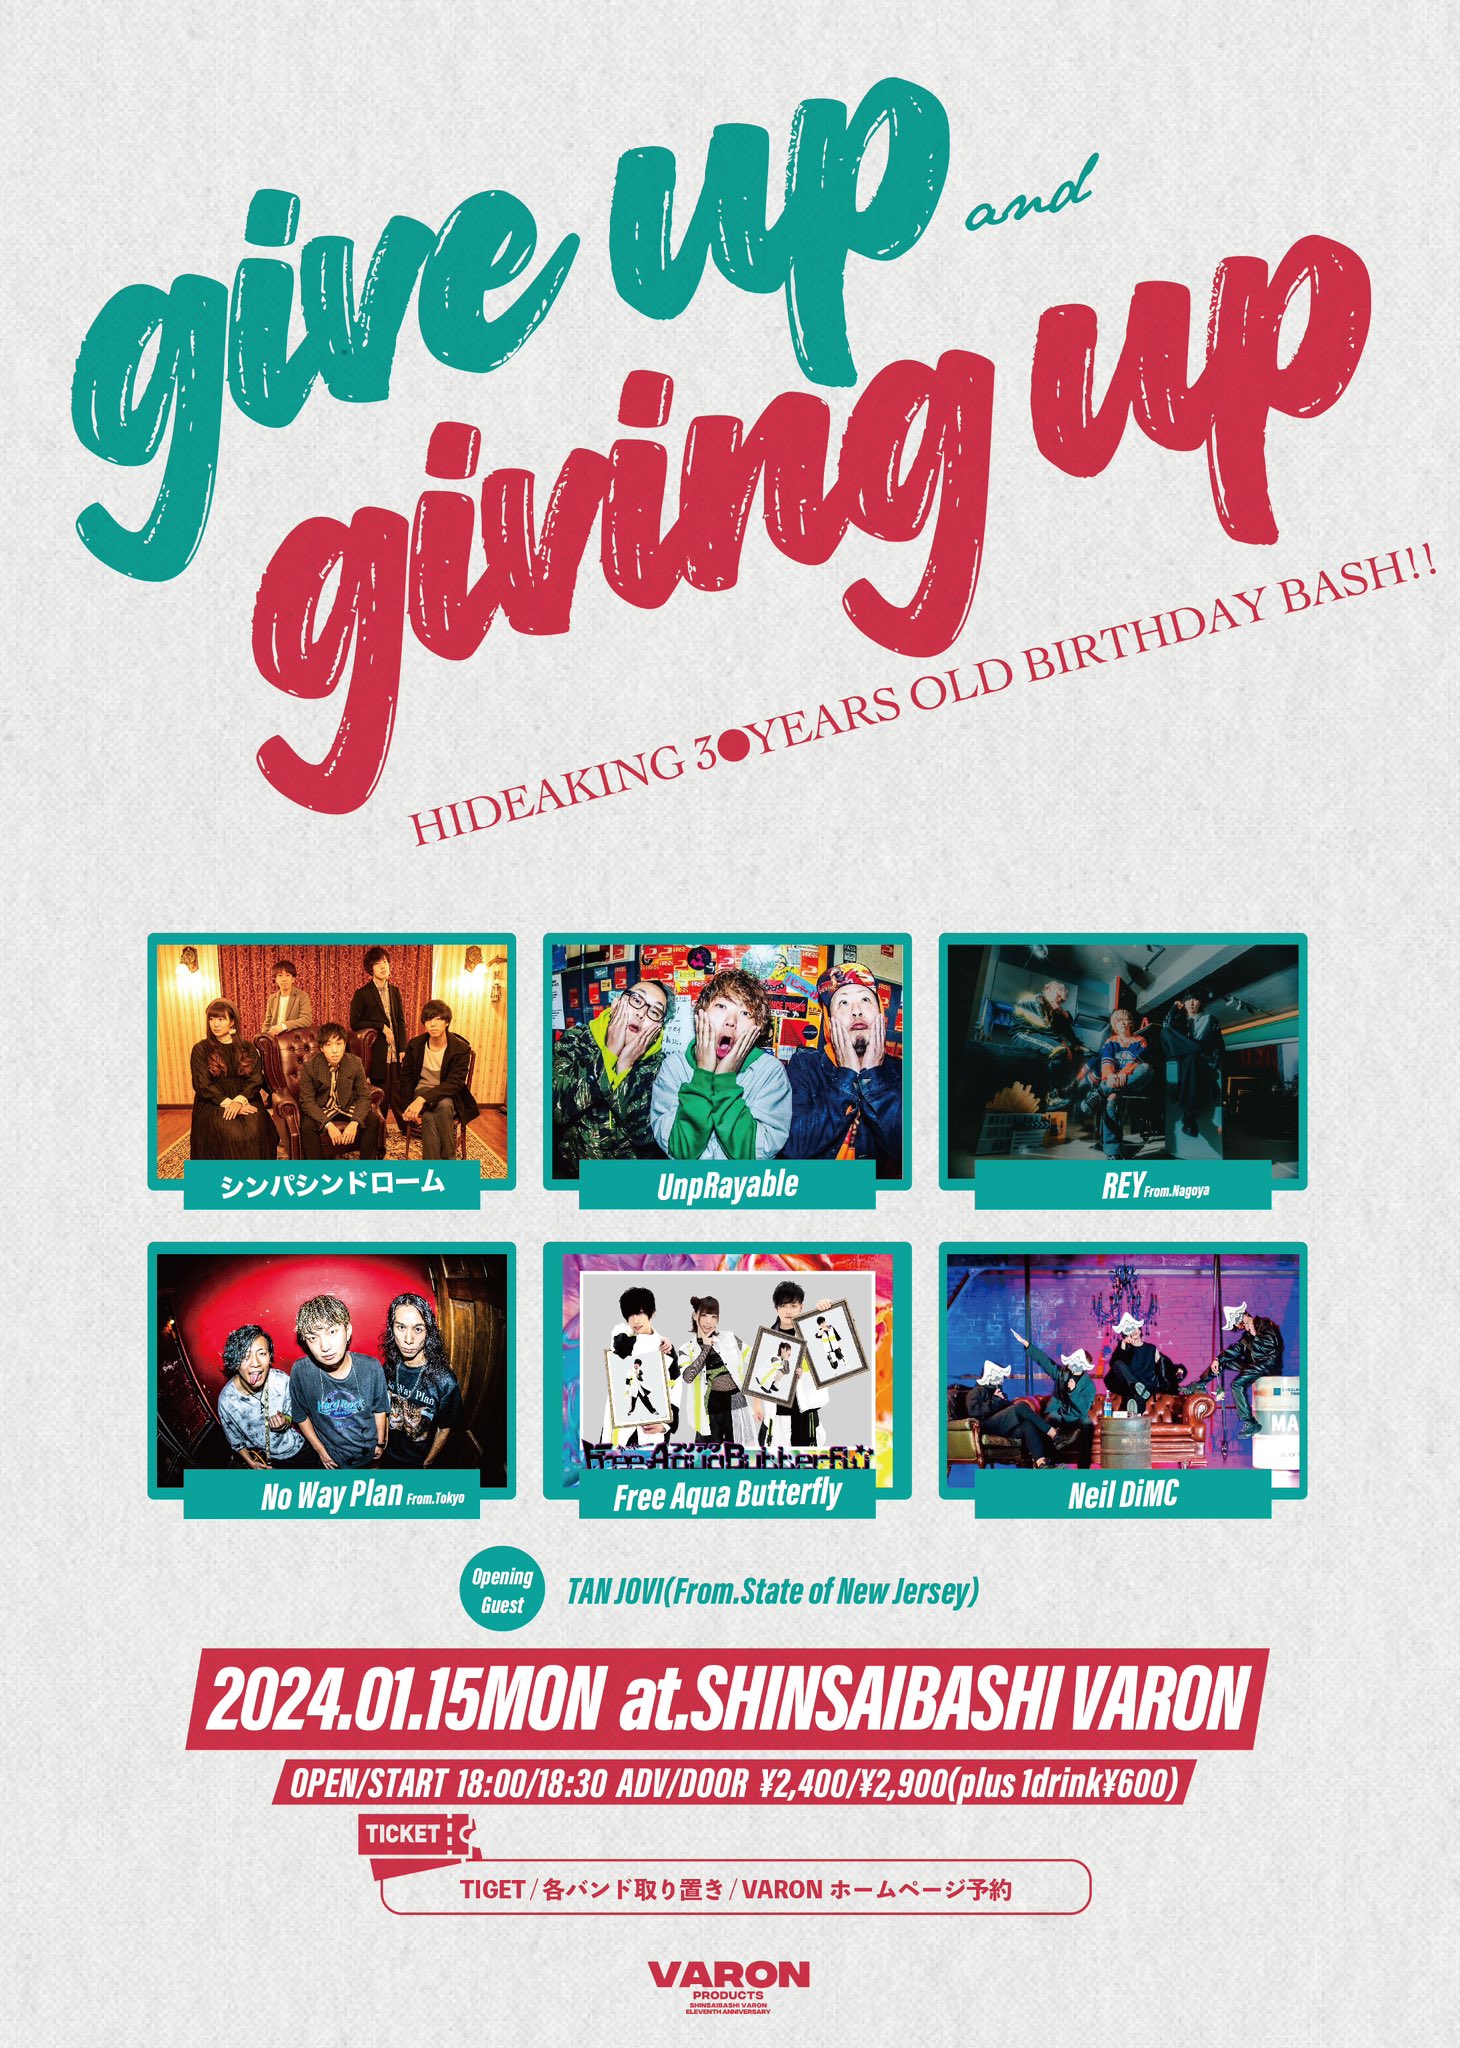 “Give up on giving up” – HIDEAKING 3● YEARS OLD BIRTHDAY BASH!!